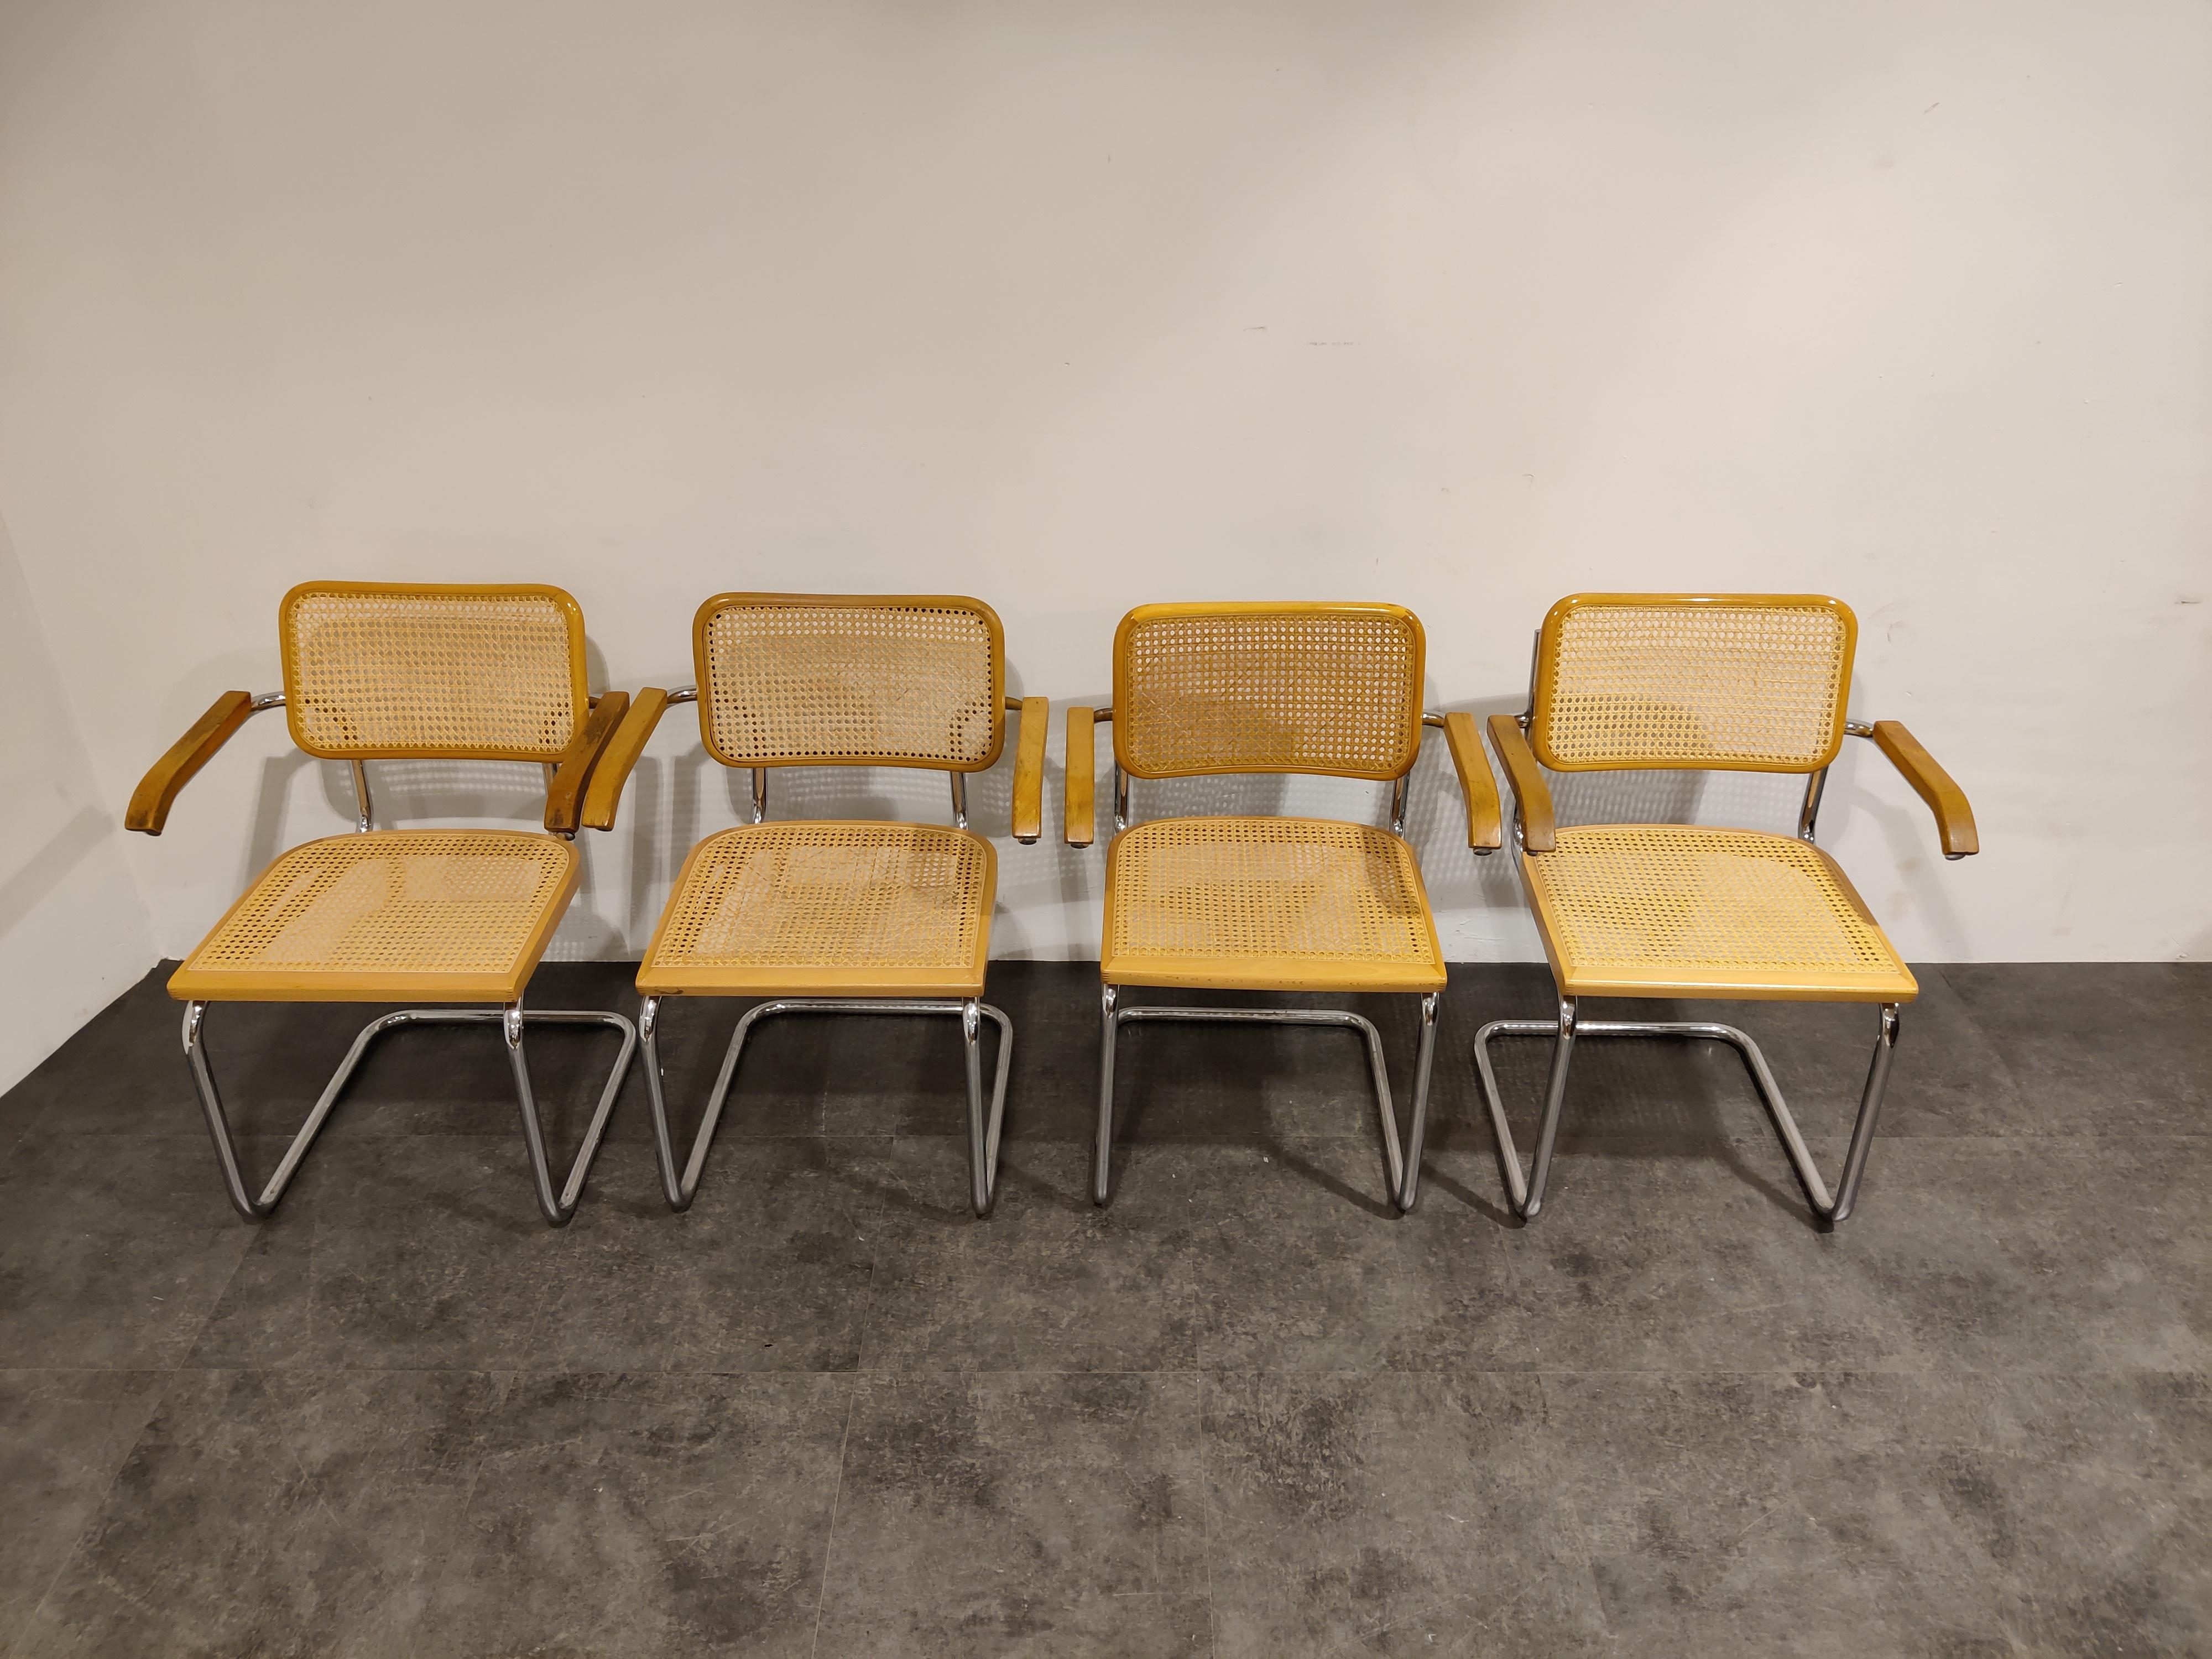 Marcel Breuer style cesca Bauhaus design chairs. 

Good condition.

Very popular design which mixes well with most interiors. The Bauhaus design never gets old.

1970s - Italy

Dimensions:
Height: 80cm/31.49